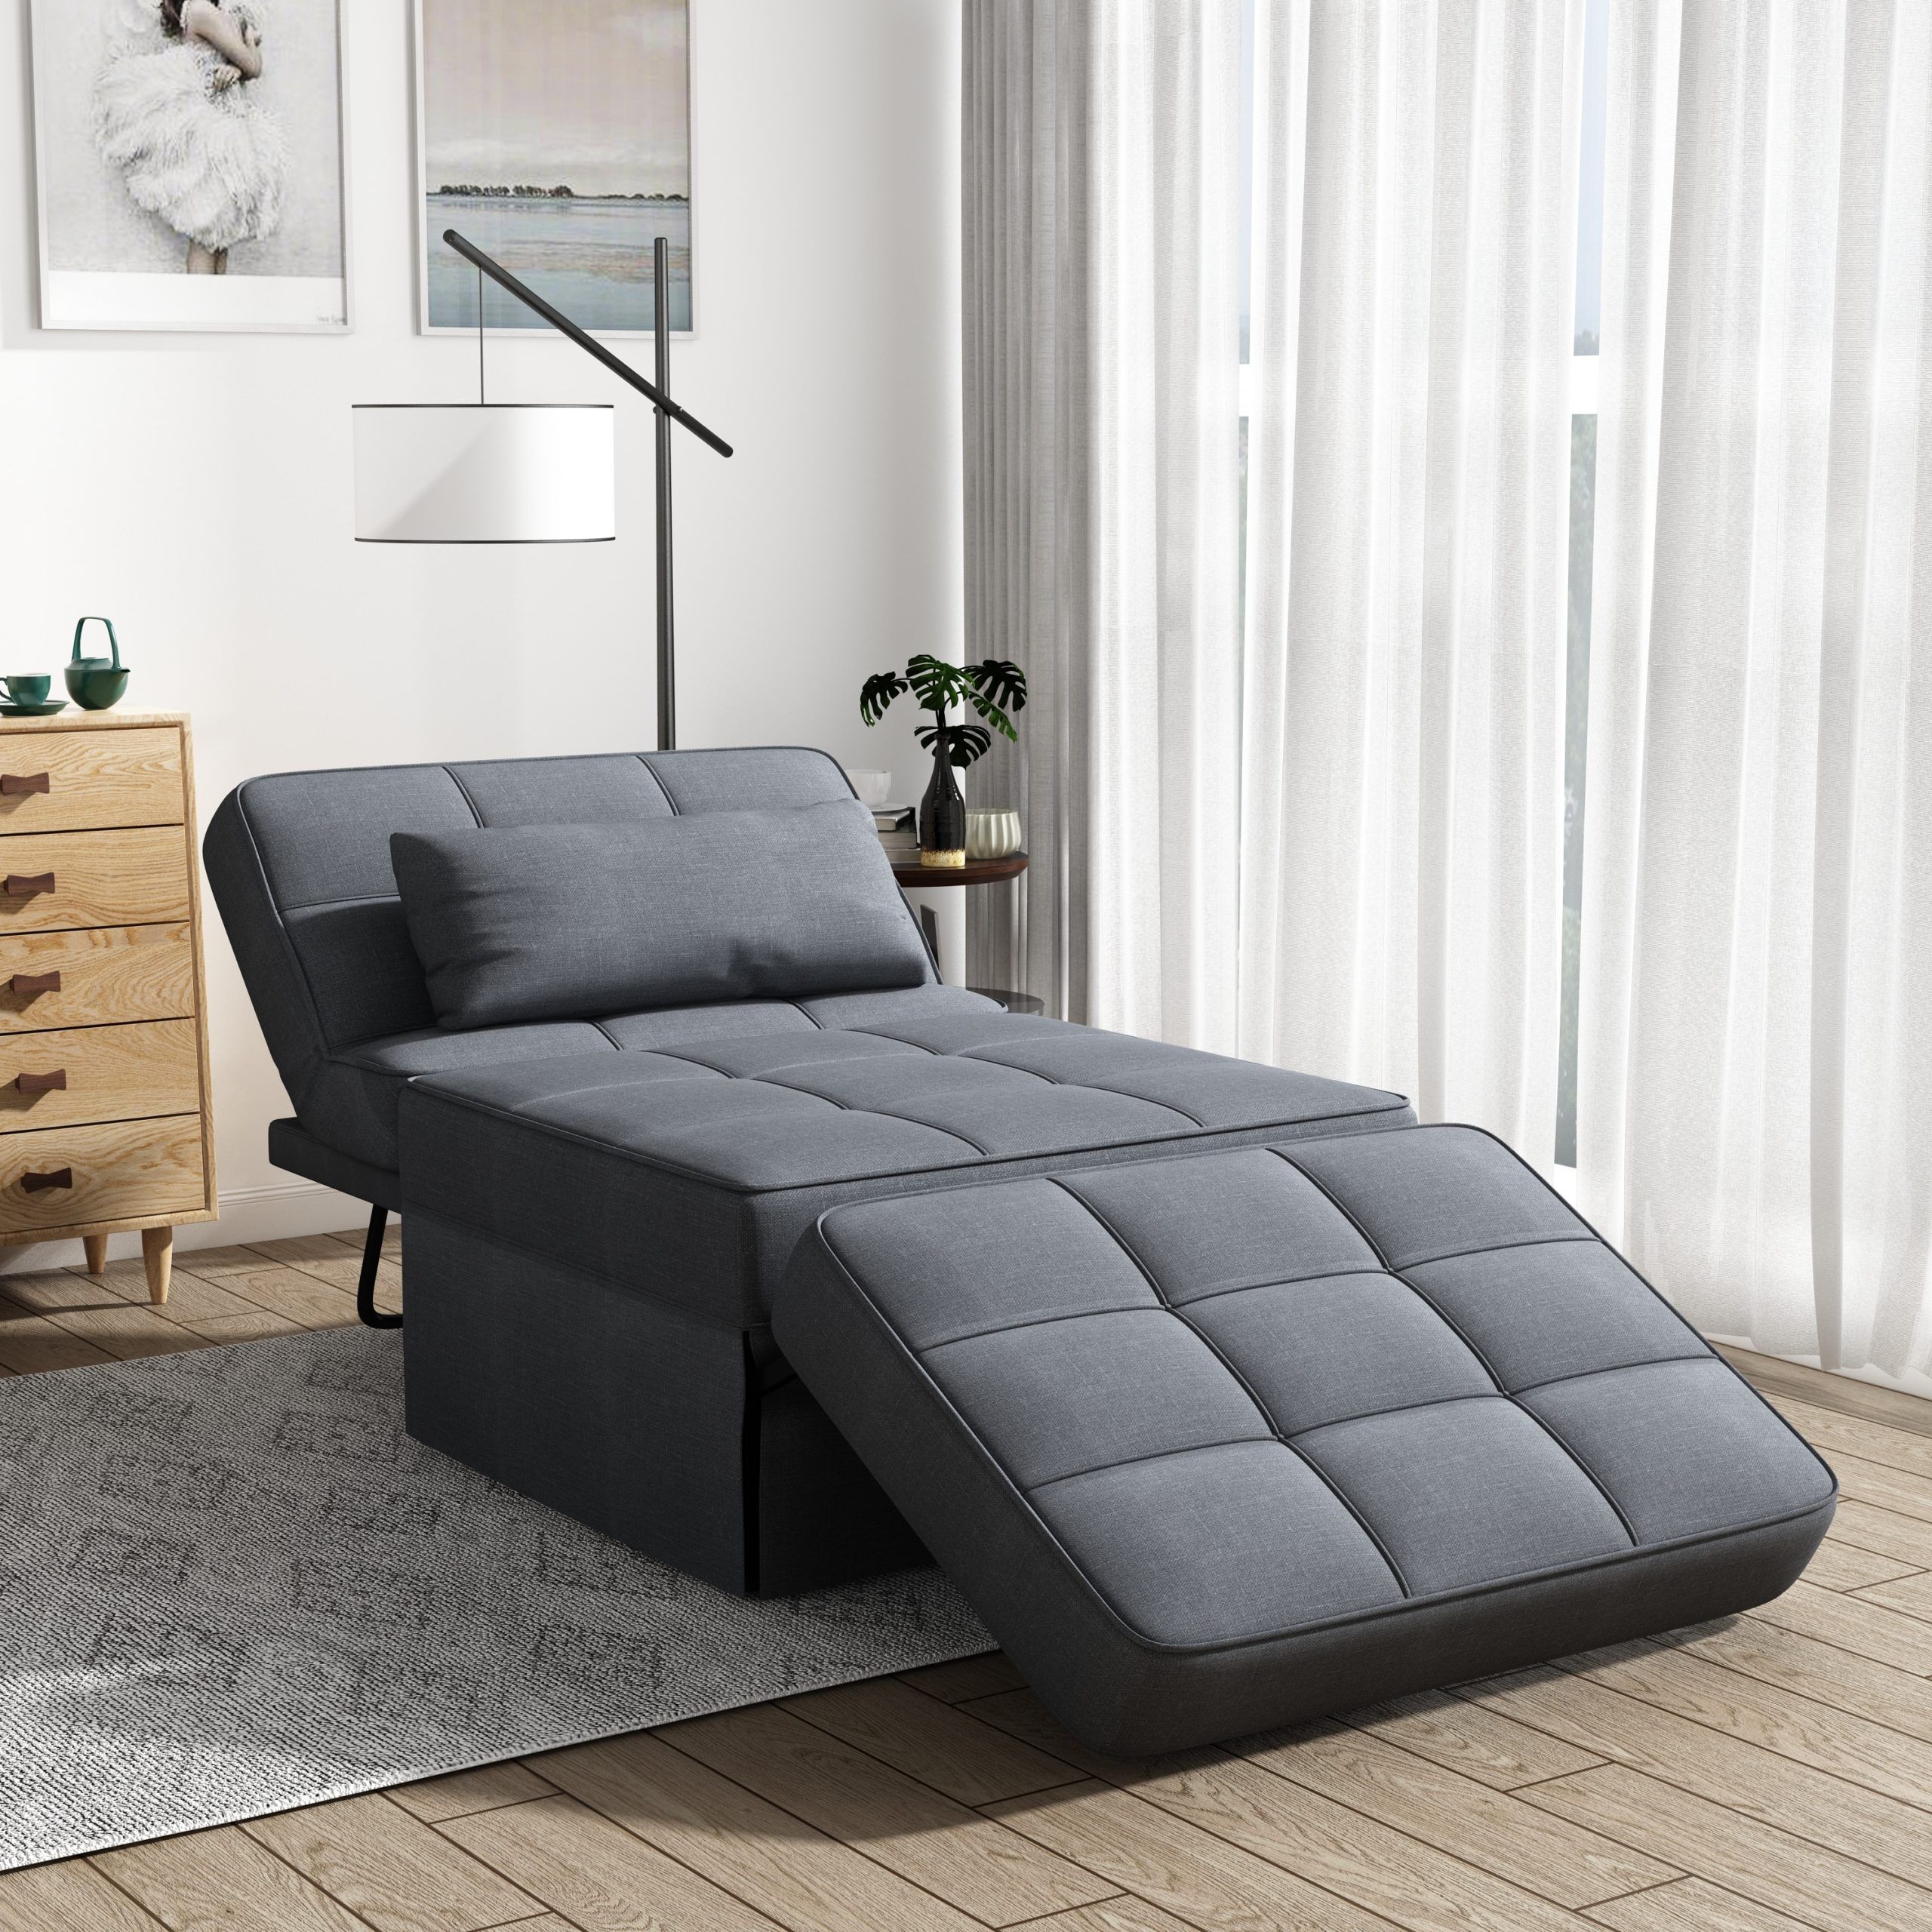 Sofa Bed, 4 In 1 Multi Function Folding Ottoman Breathable Linen Couch Bed  With Adjustable Backrest Modern Convertible Chair – On Sale – Bed Bath &  Beyond – 36687063 Regarding 4 In 1 Convertible Sleeper Chair Beds (Photo 9 of 15)